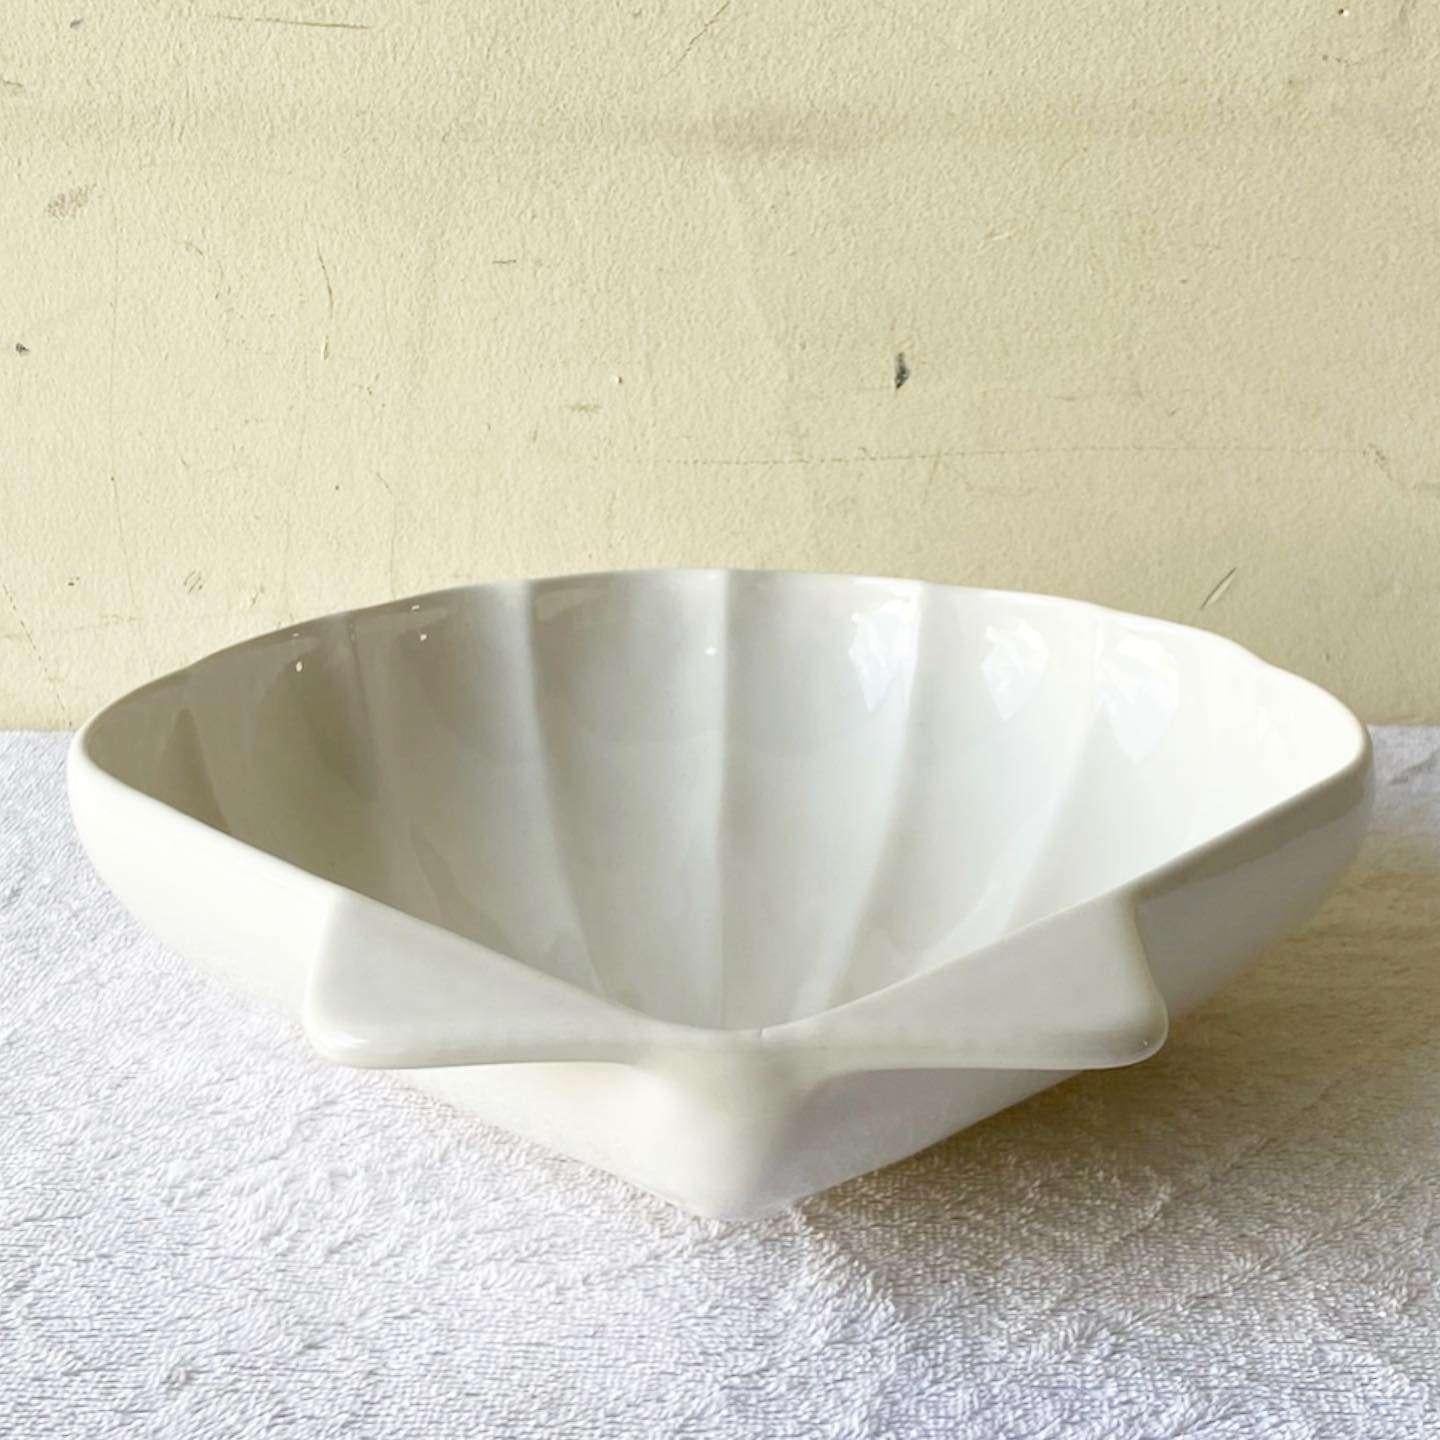 Wonderful vintage ceramic sea shell serving dish. Features an off white glossy finish.
